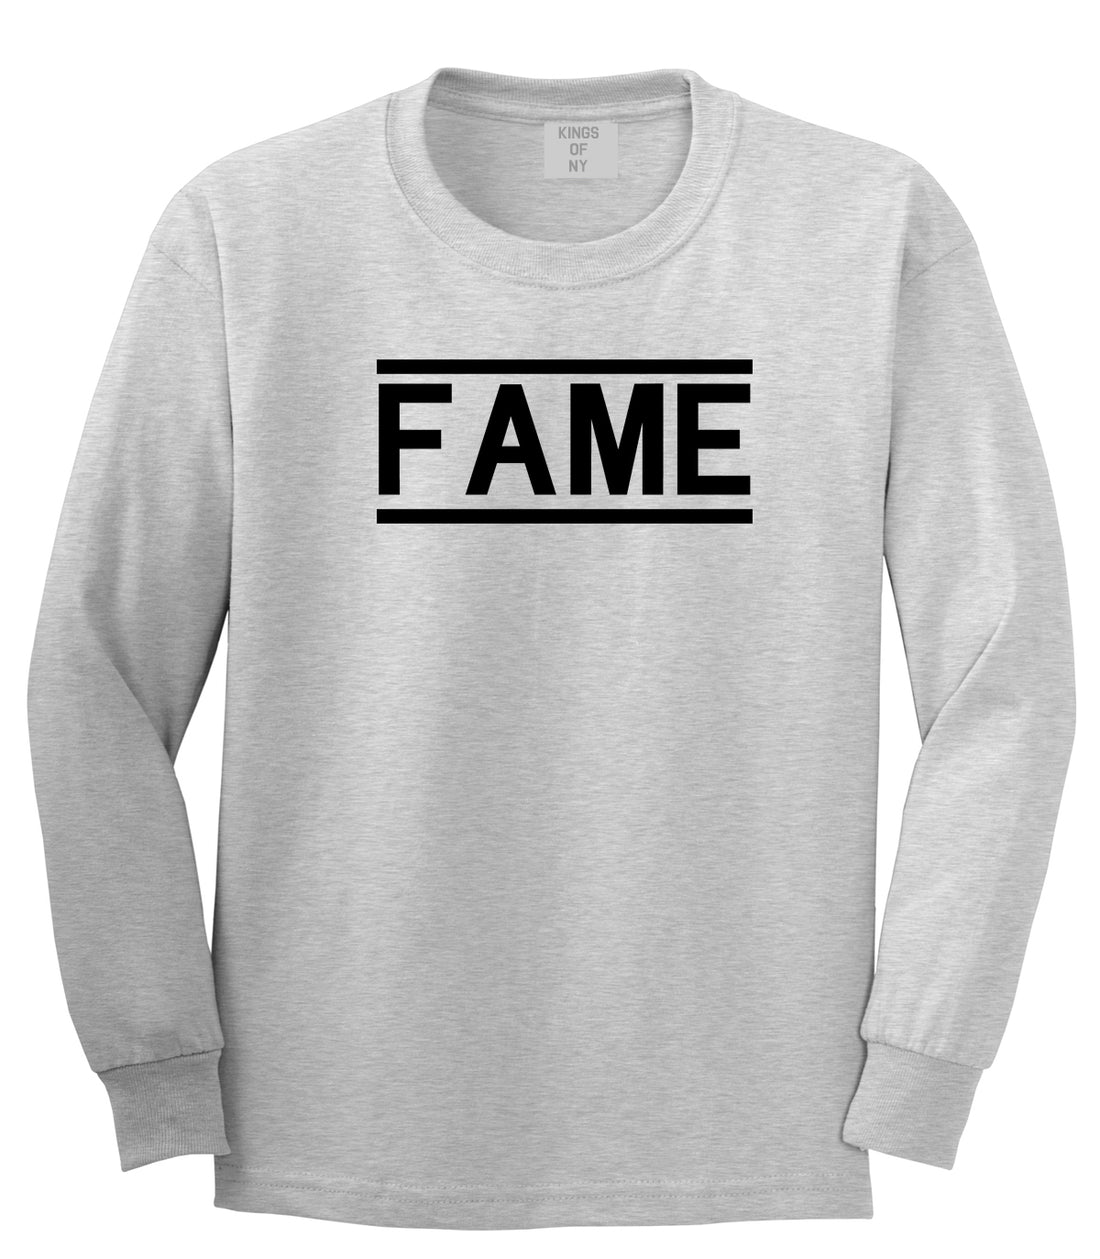 Fame Famous Mens Grey Long Sleeve T-Shirt by KINGS OF NY